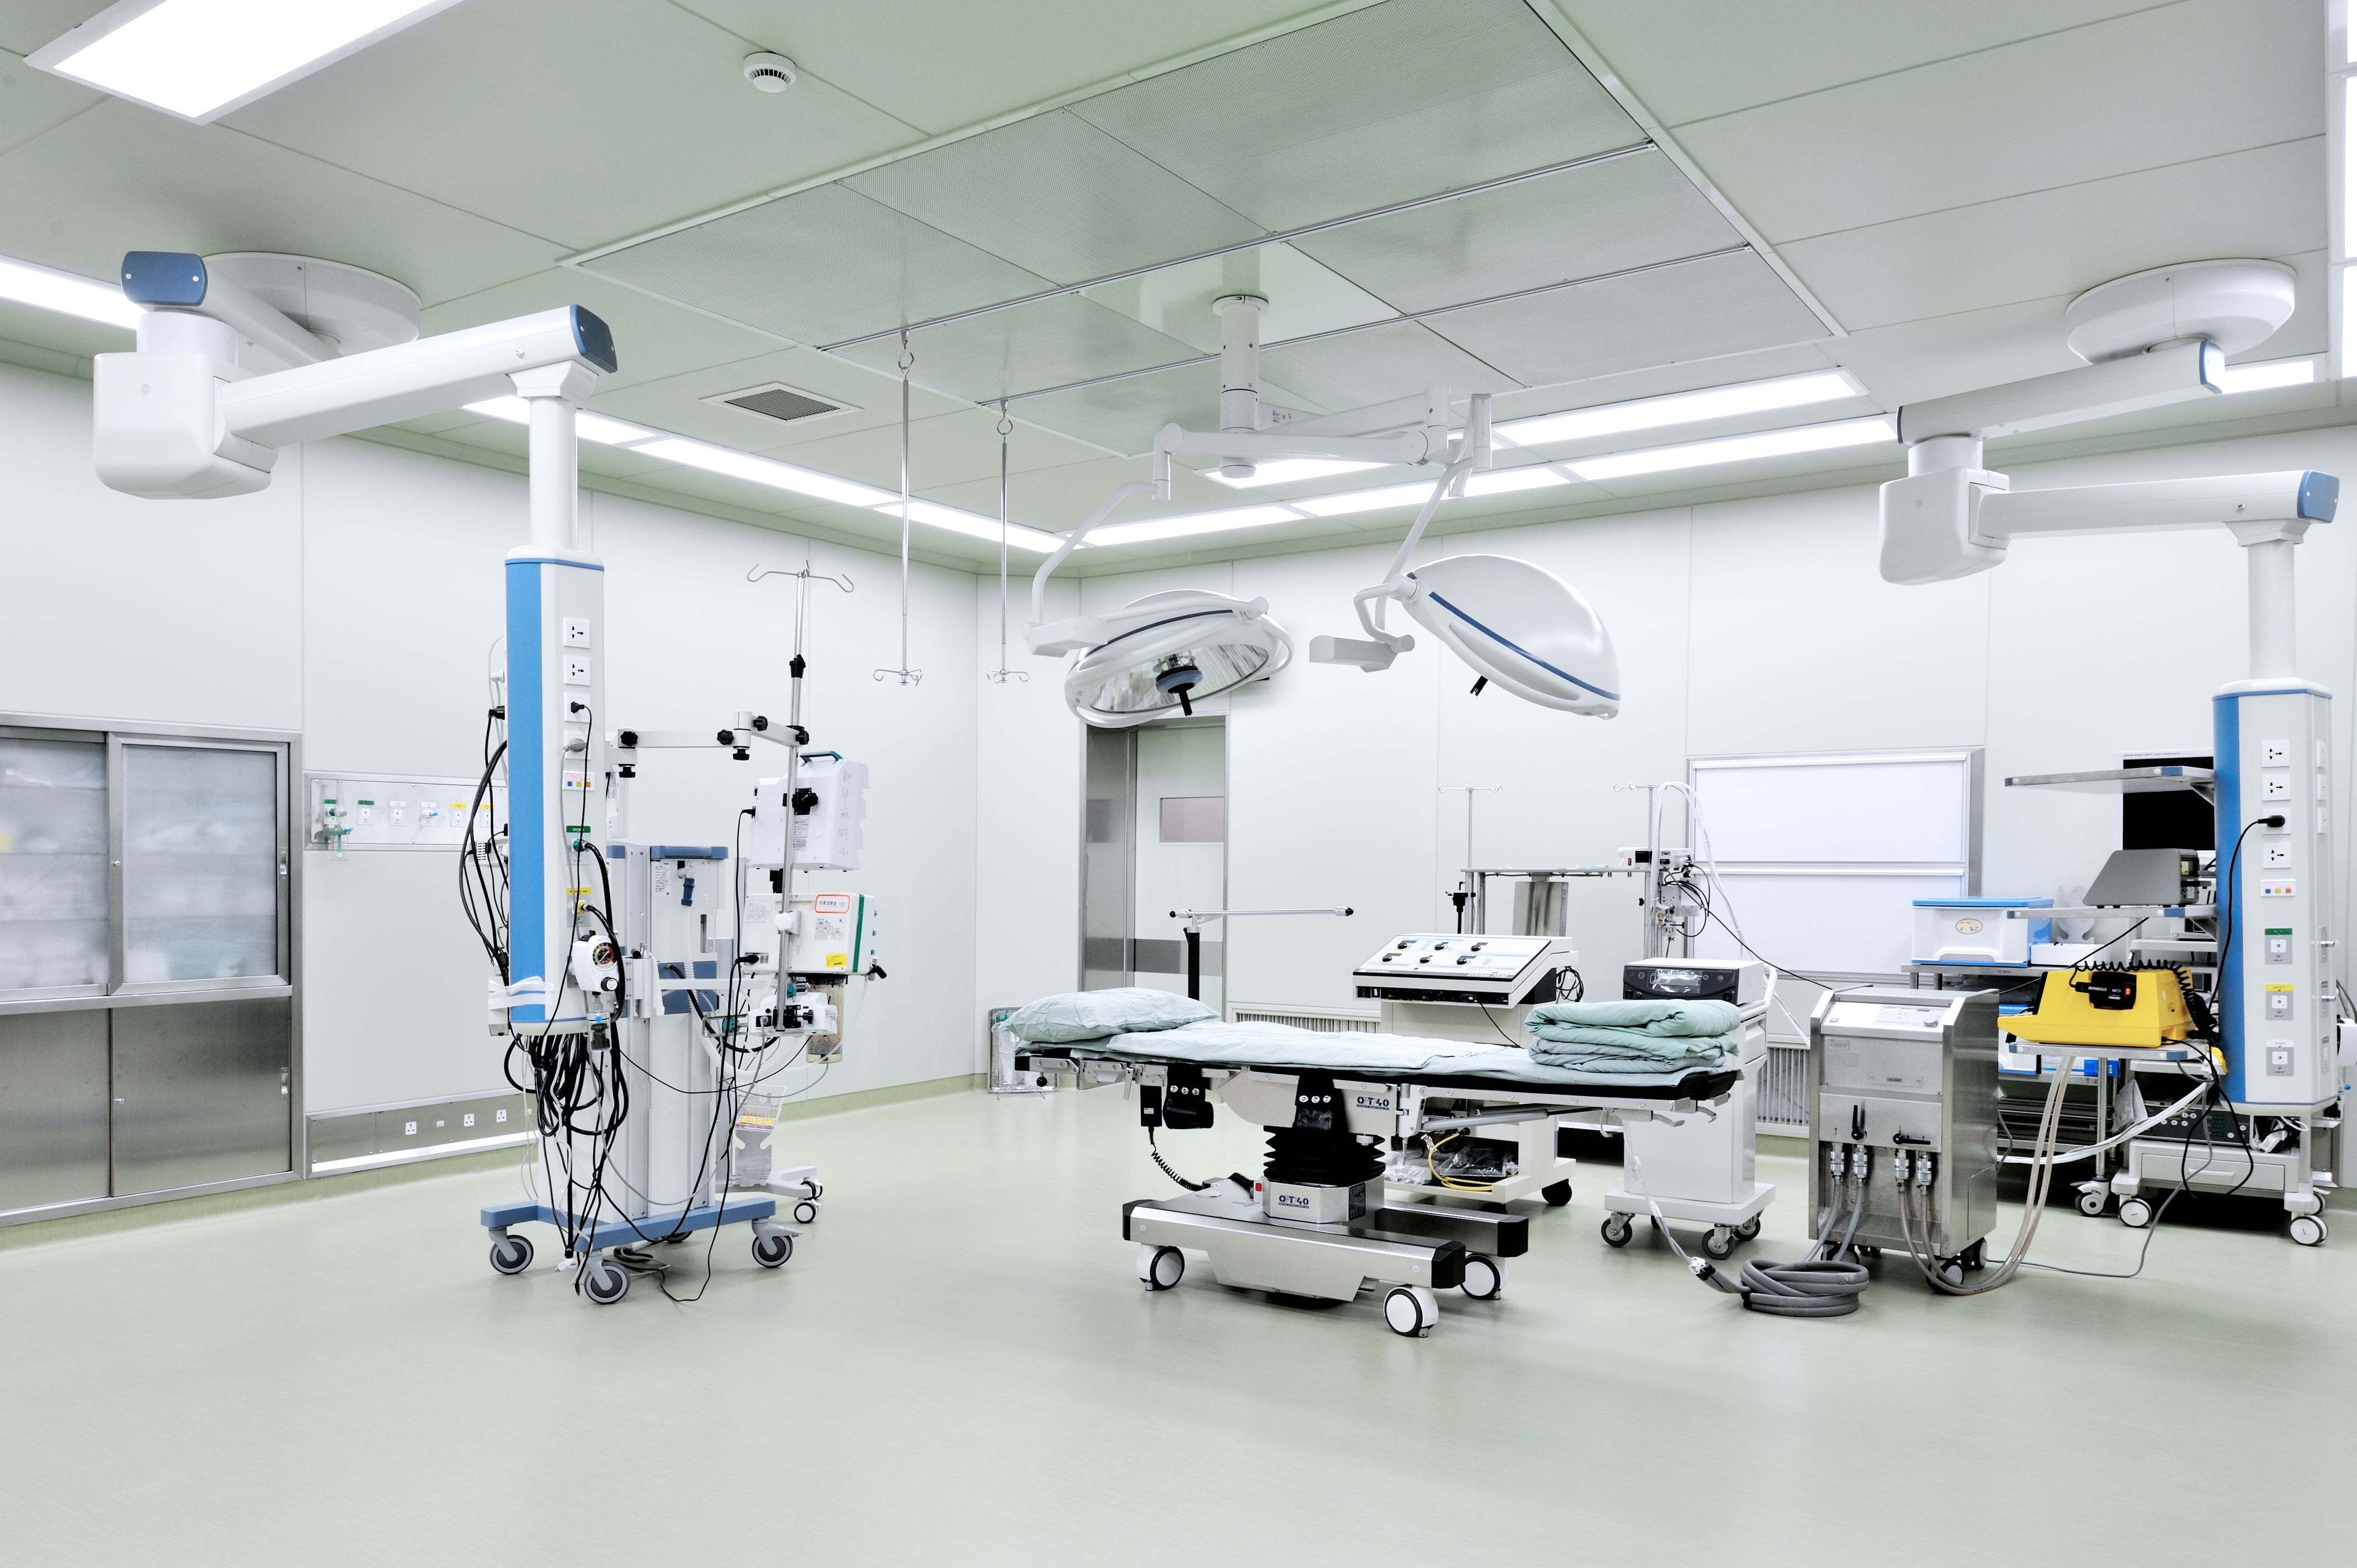 >How will the flow of personnel affect the purification of operating rooms?